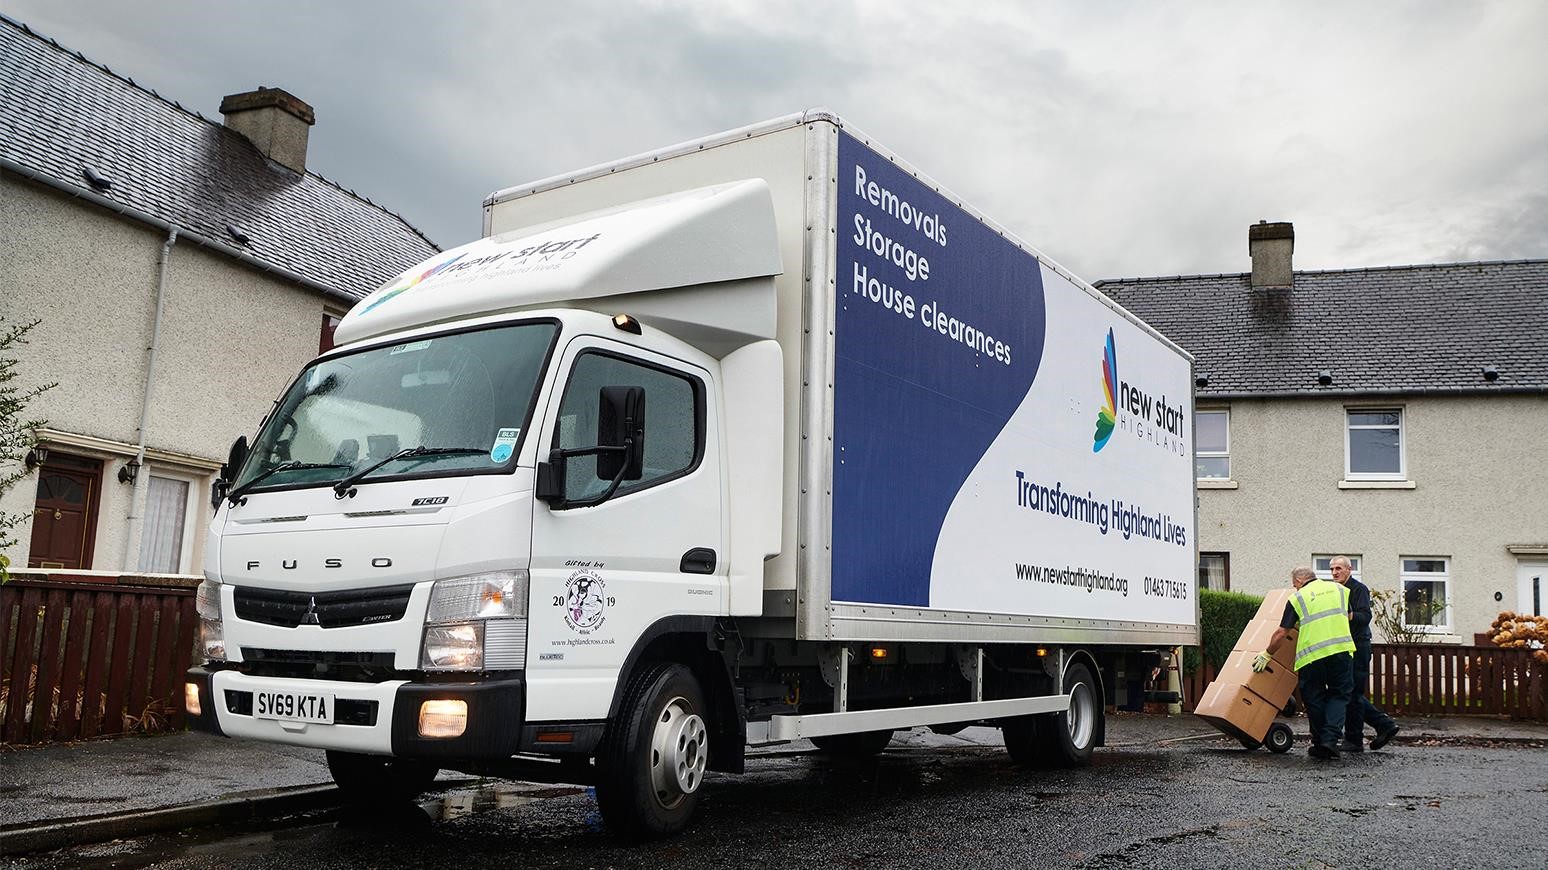 Scottish Charity New Start Highland Relies On Mitsubishi FUSO Canters For Furniture Deliveries & More